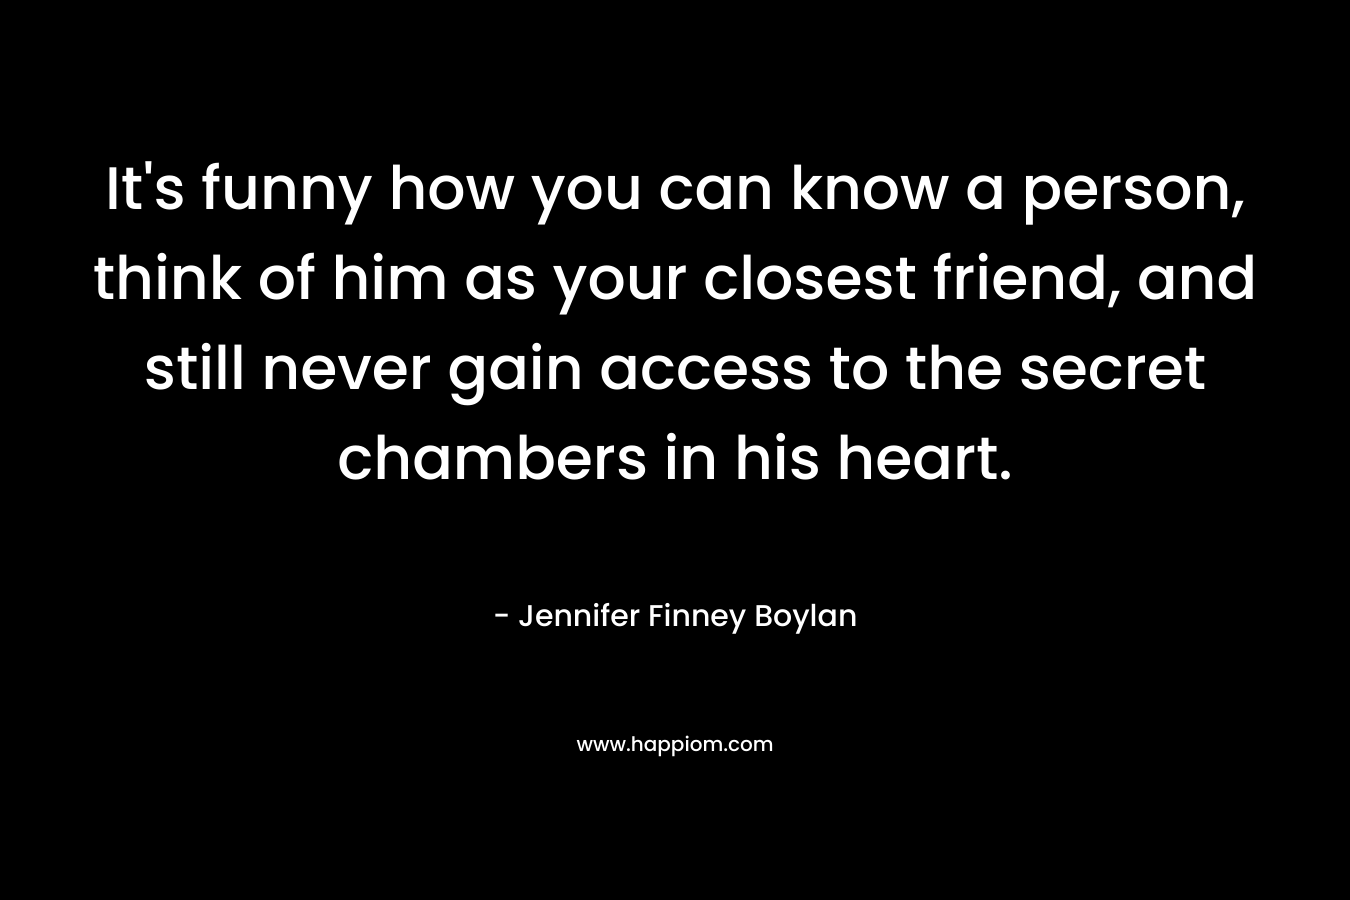 It's funny how you can know a person, think of him as your closest friend, and still never gain access to the secret chambers in his heart.